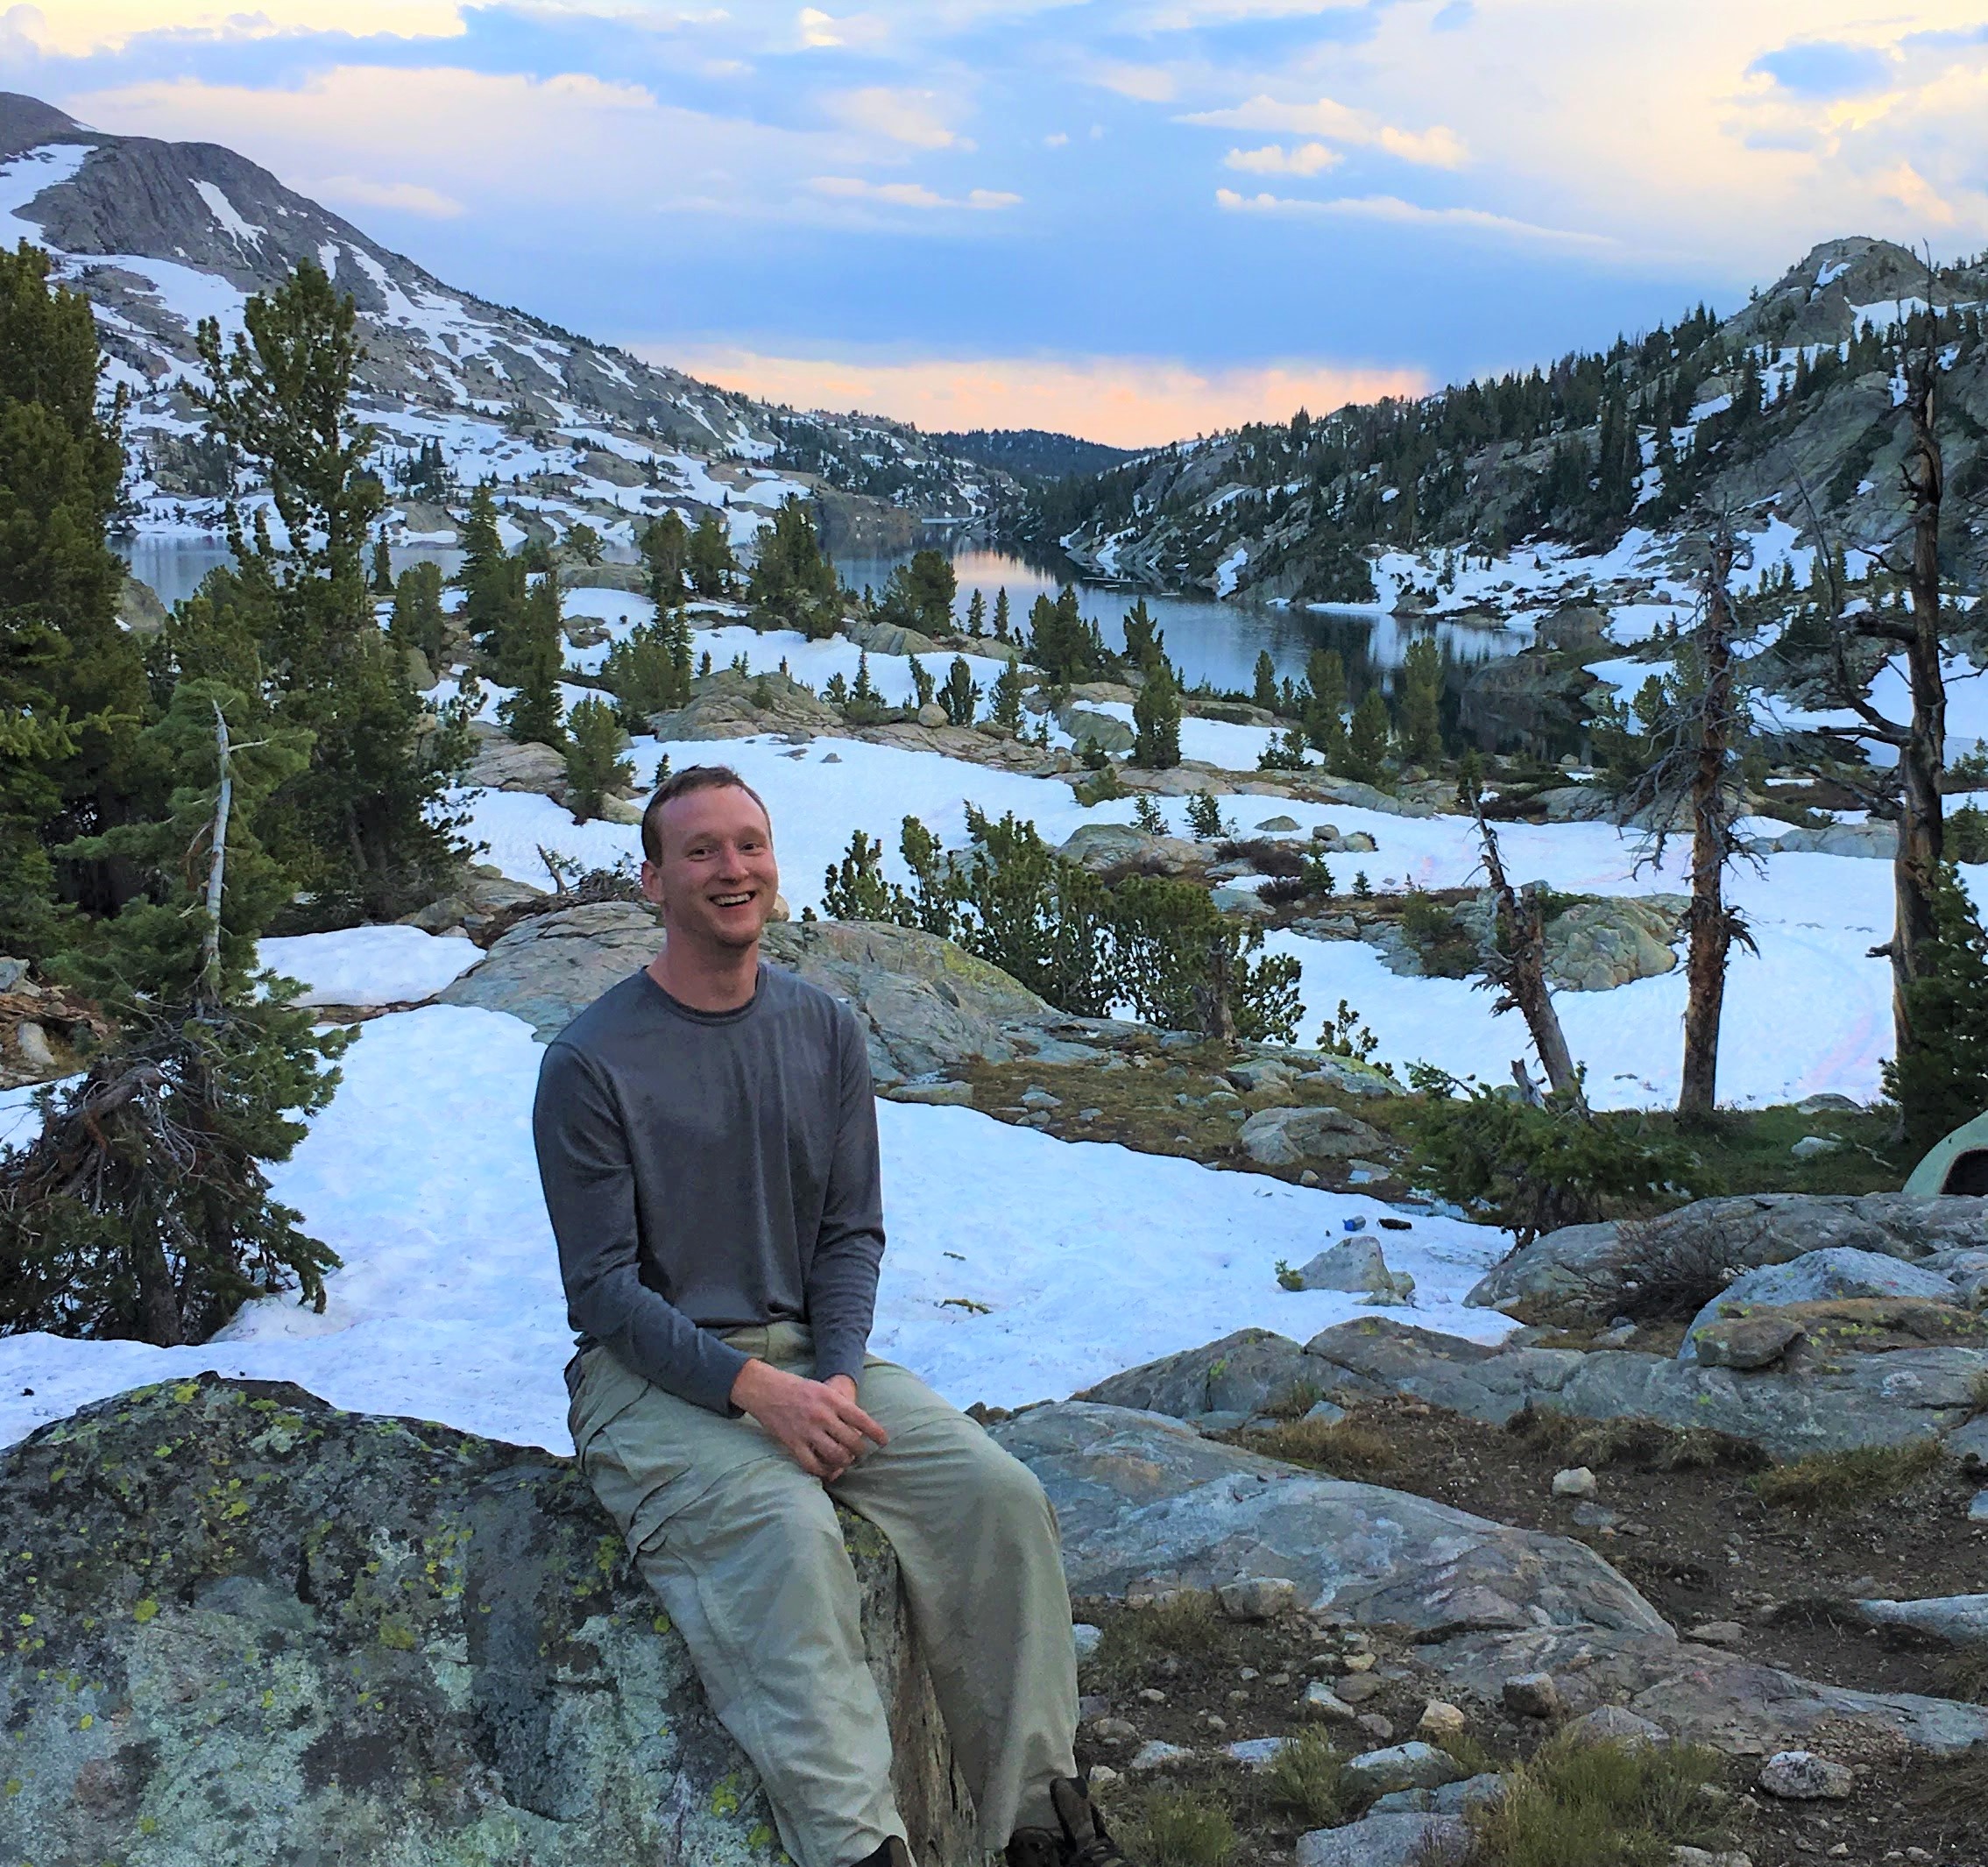 Photograph of Matthew Pintar sitting on a rock surrounded by rocks, snow, and mountains with a lake behind him.